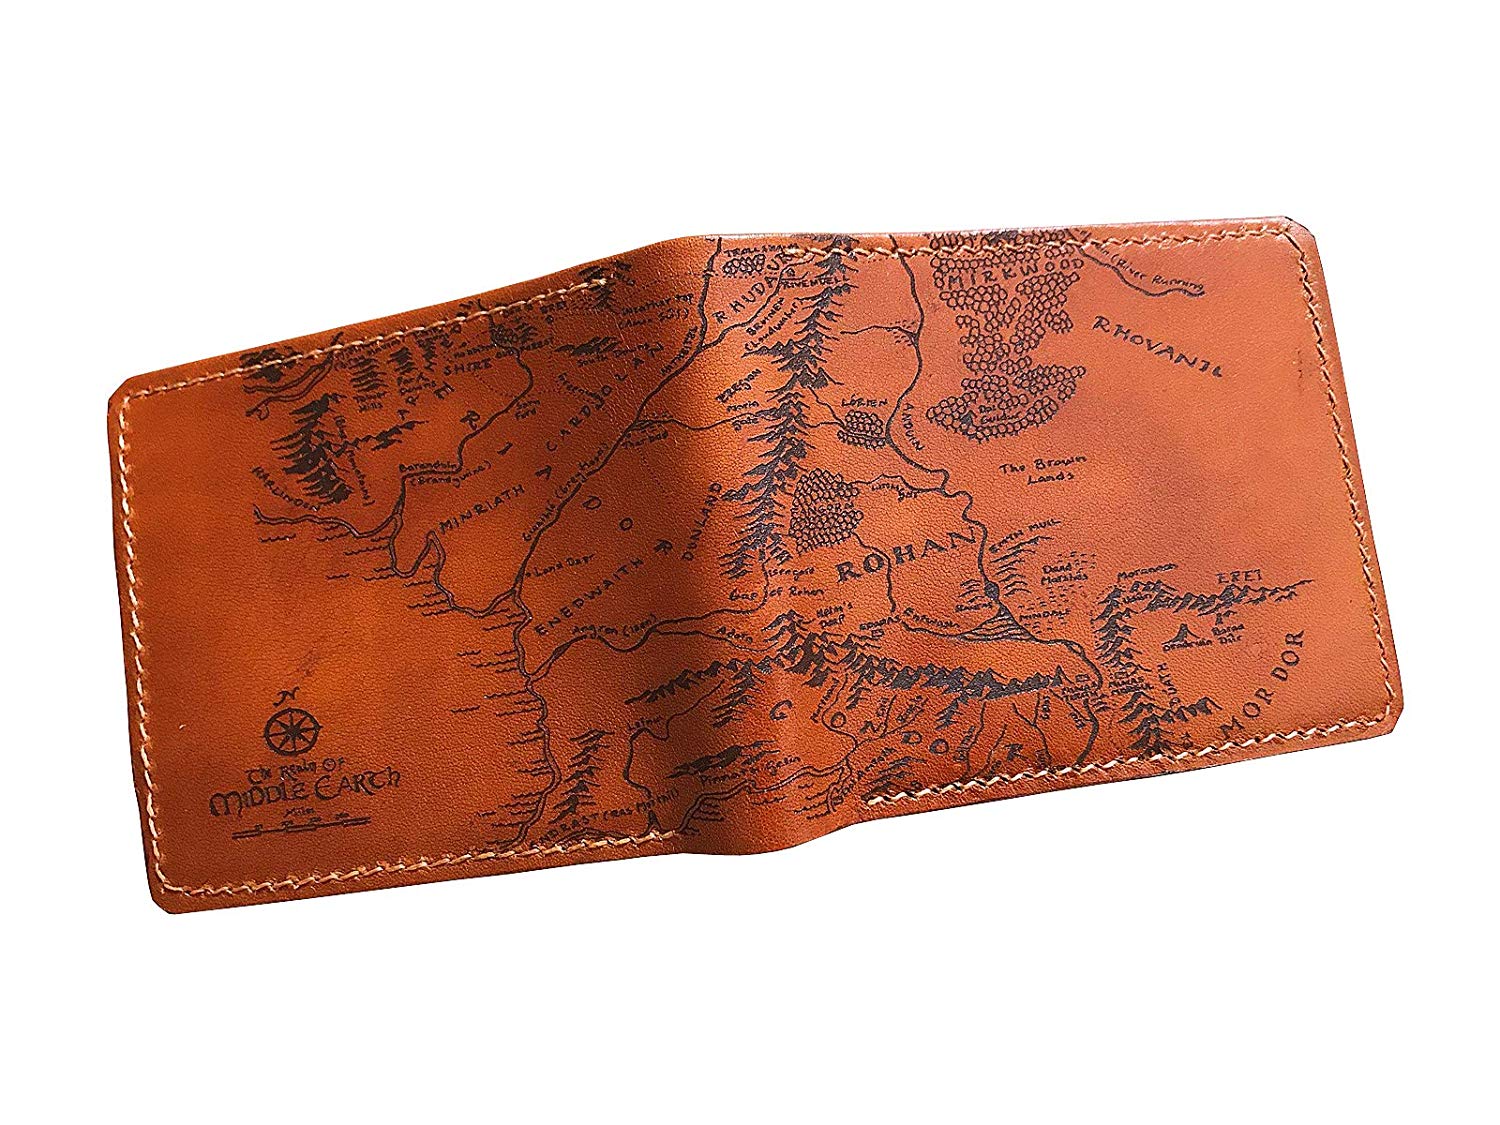 The Lord of The Rings Middle Earth map genuine leather handmade men wallet gift for him